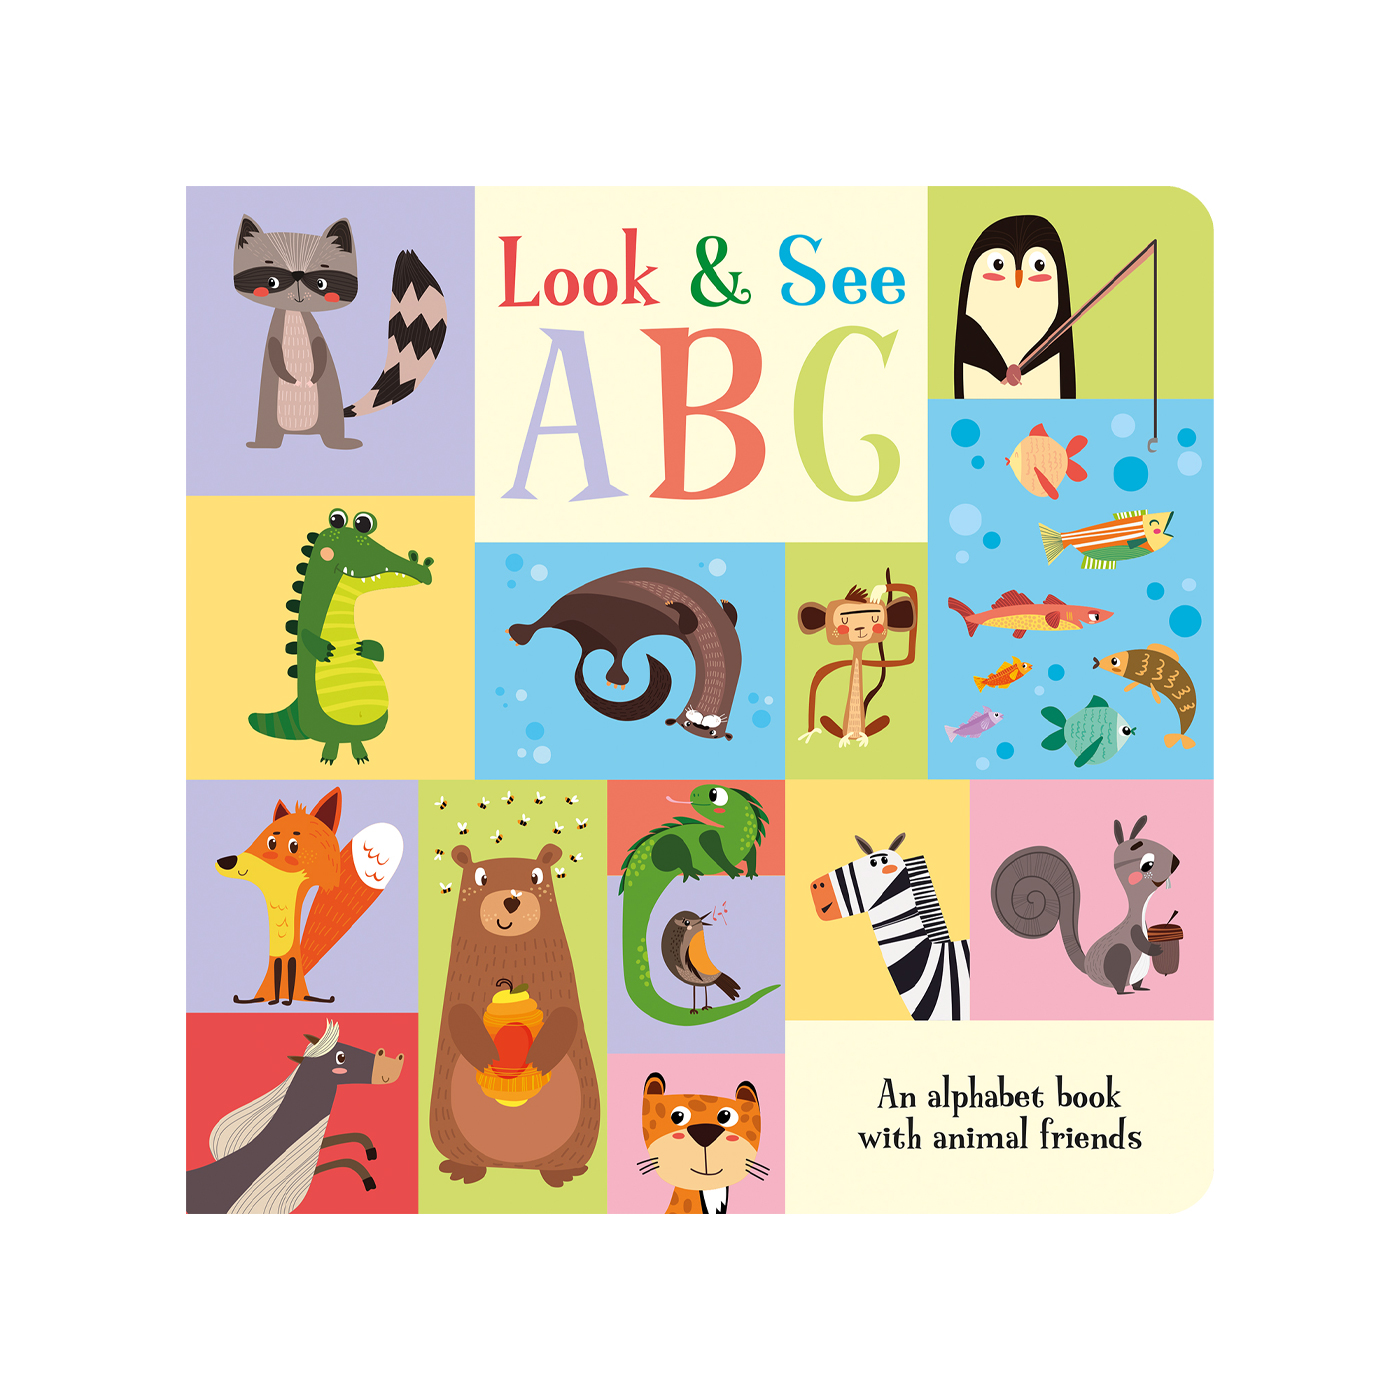  Look & See: ABC